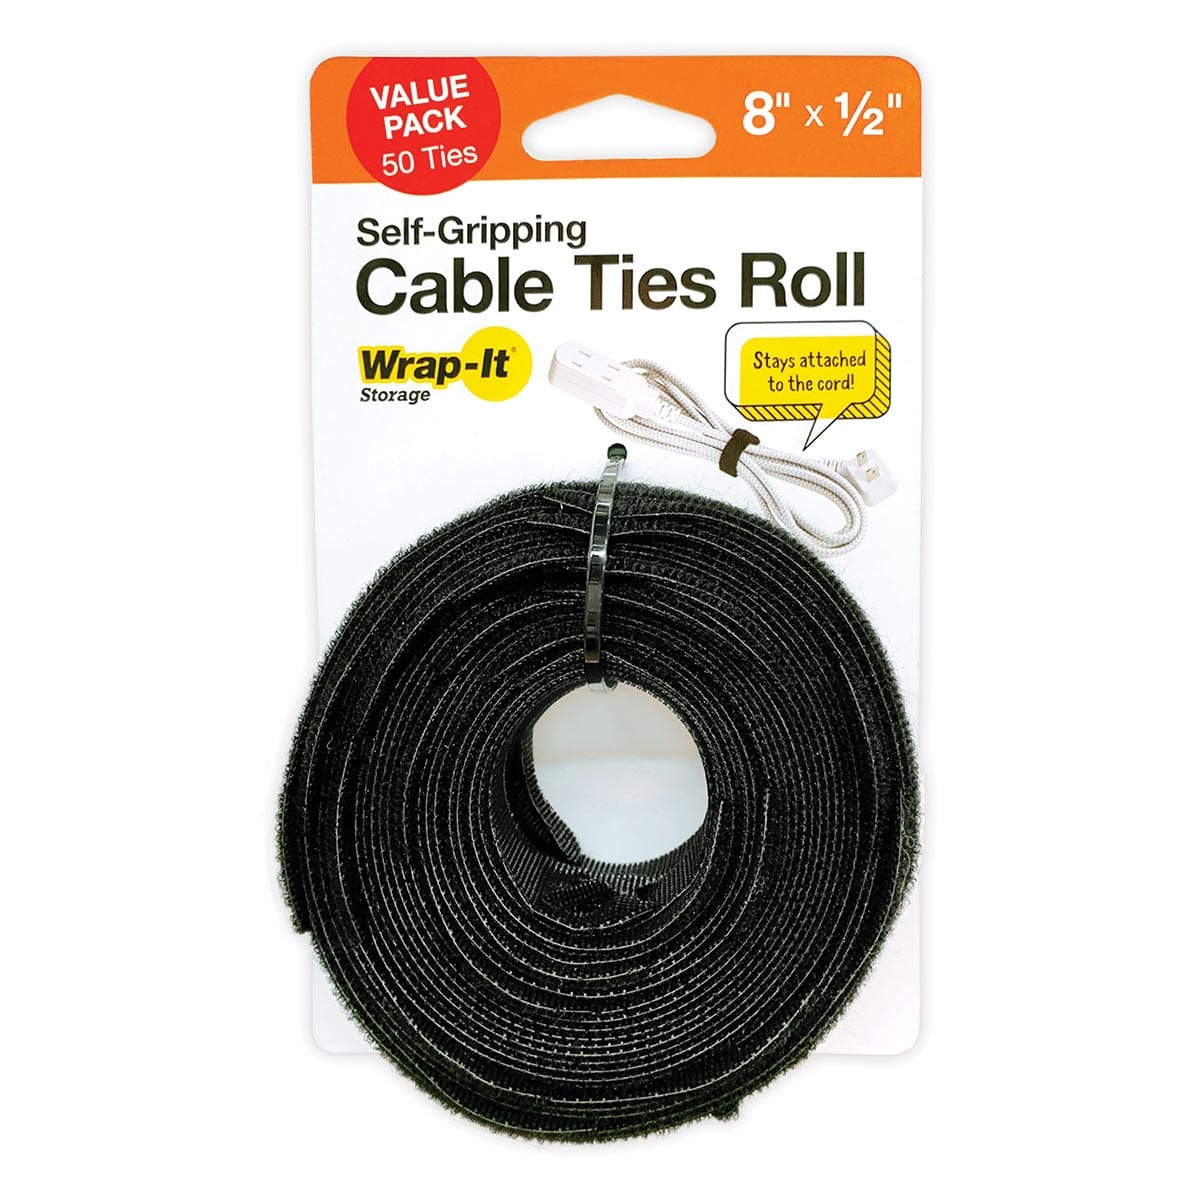 Wrap-It Storage Self-Gripping Cable Ties Roll - 8" (50-Pack)